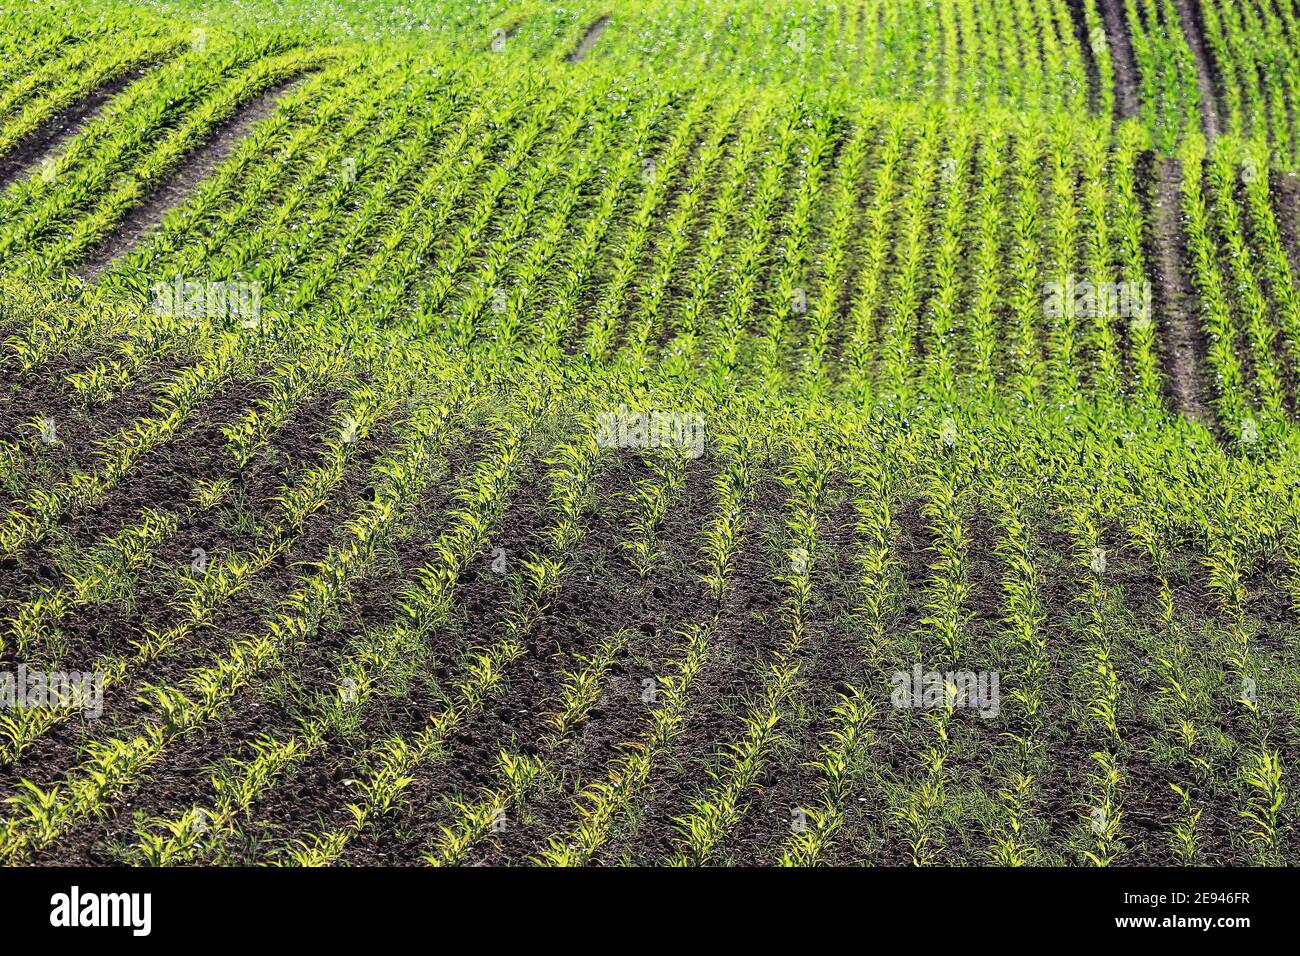 Young corn plants in a field in the hilly landscape in Schleswig-Holstein, Germany. Stock Photo